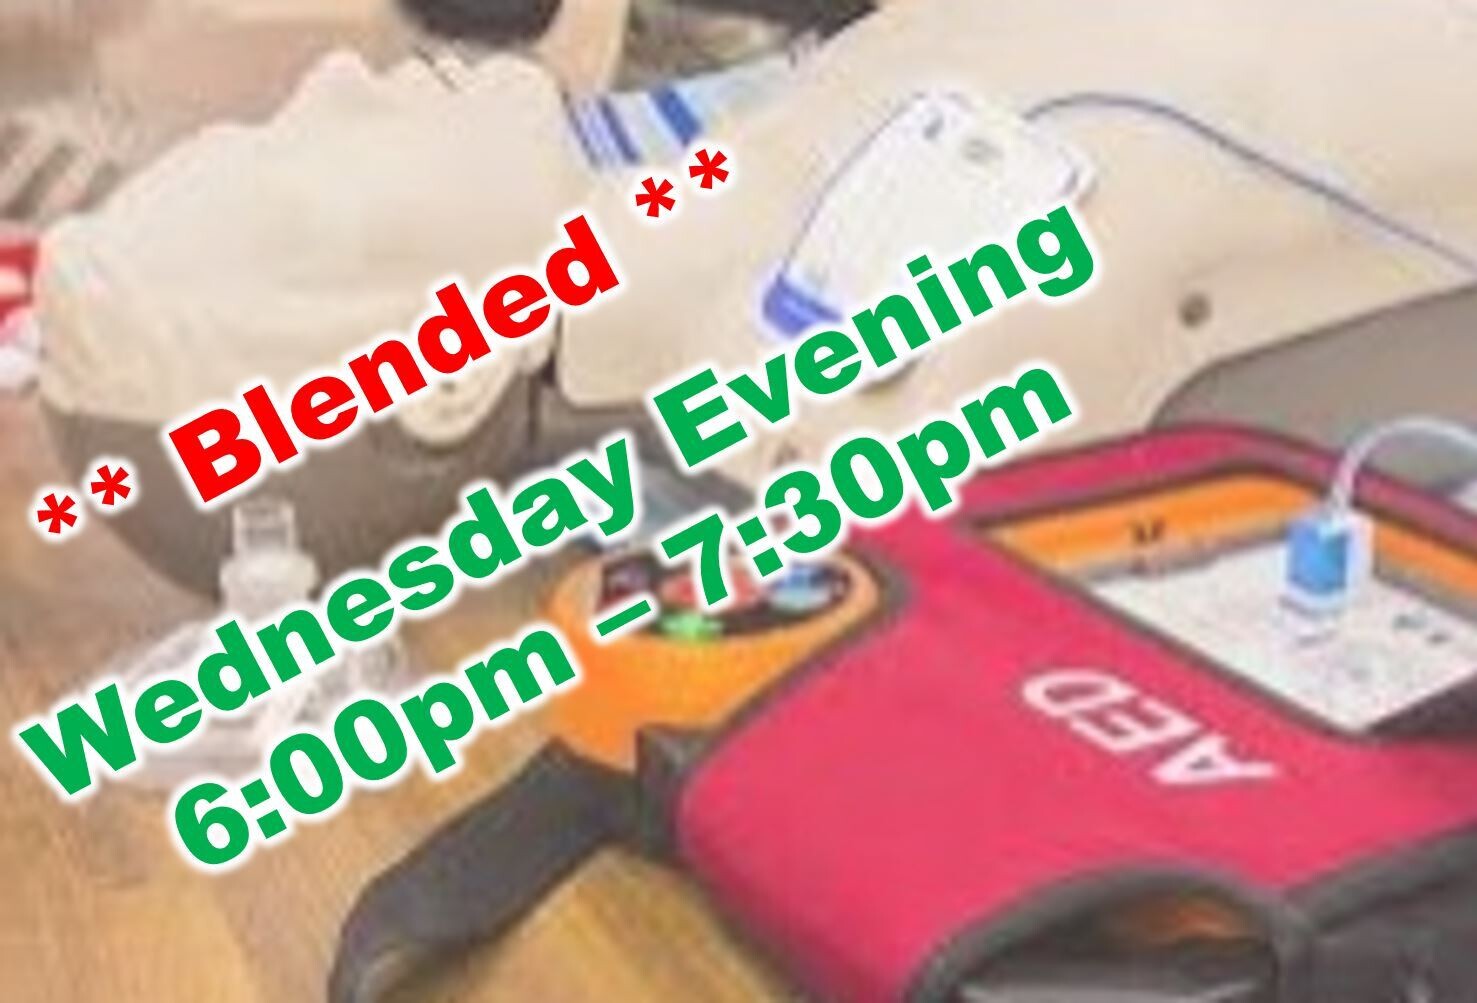 Apr. 20th, 2022 (Wednesday) 6:00pm-7:30pm CPR Class